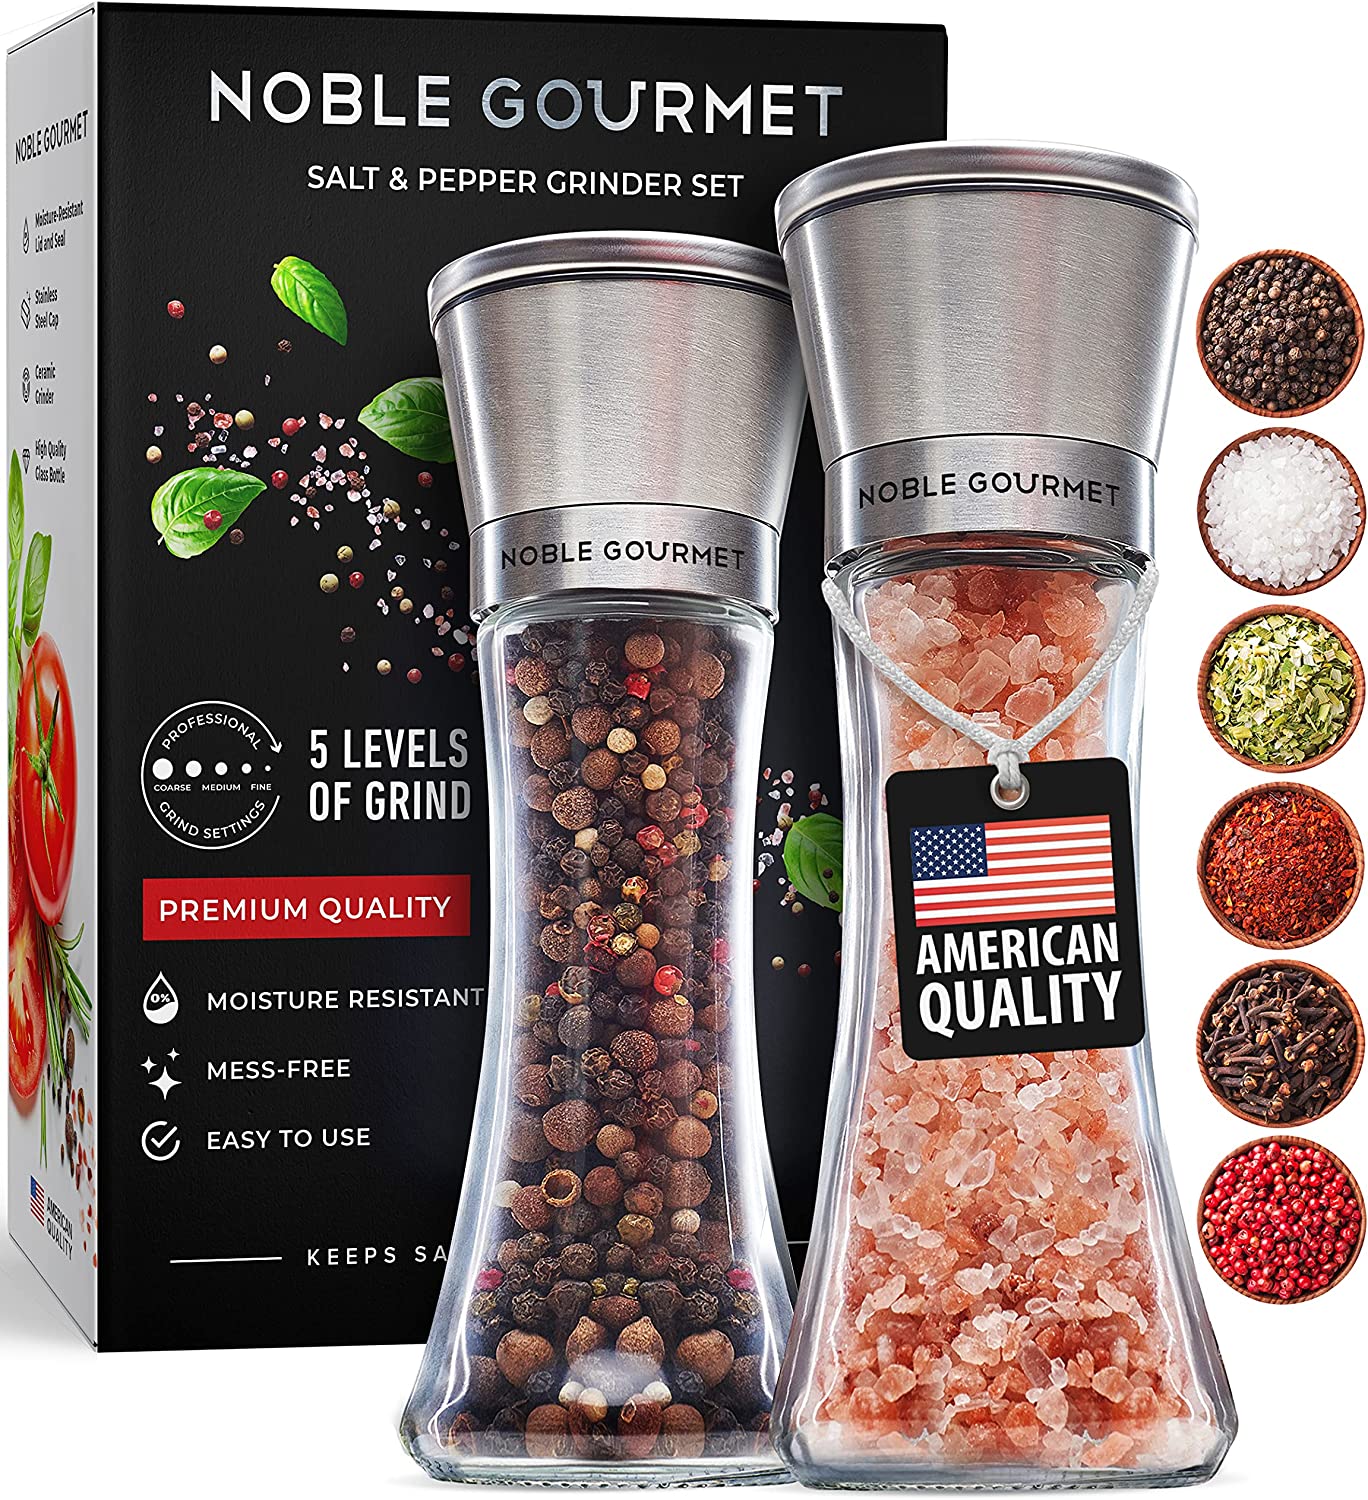 https://www.dontwasteyourmoney.com/wp-content/uploads/2023/01/noble-gourmet-manual-mess-free-salt-and-pepper-grinder-set-salt-and-pepper-grinder-set.jpg